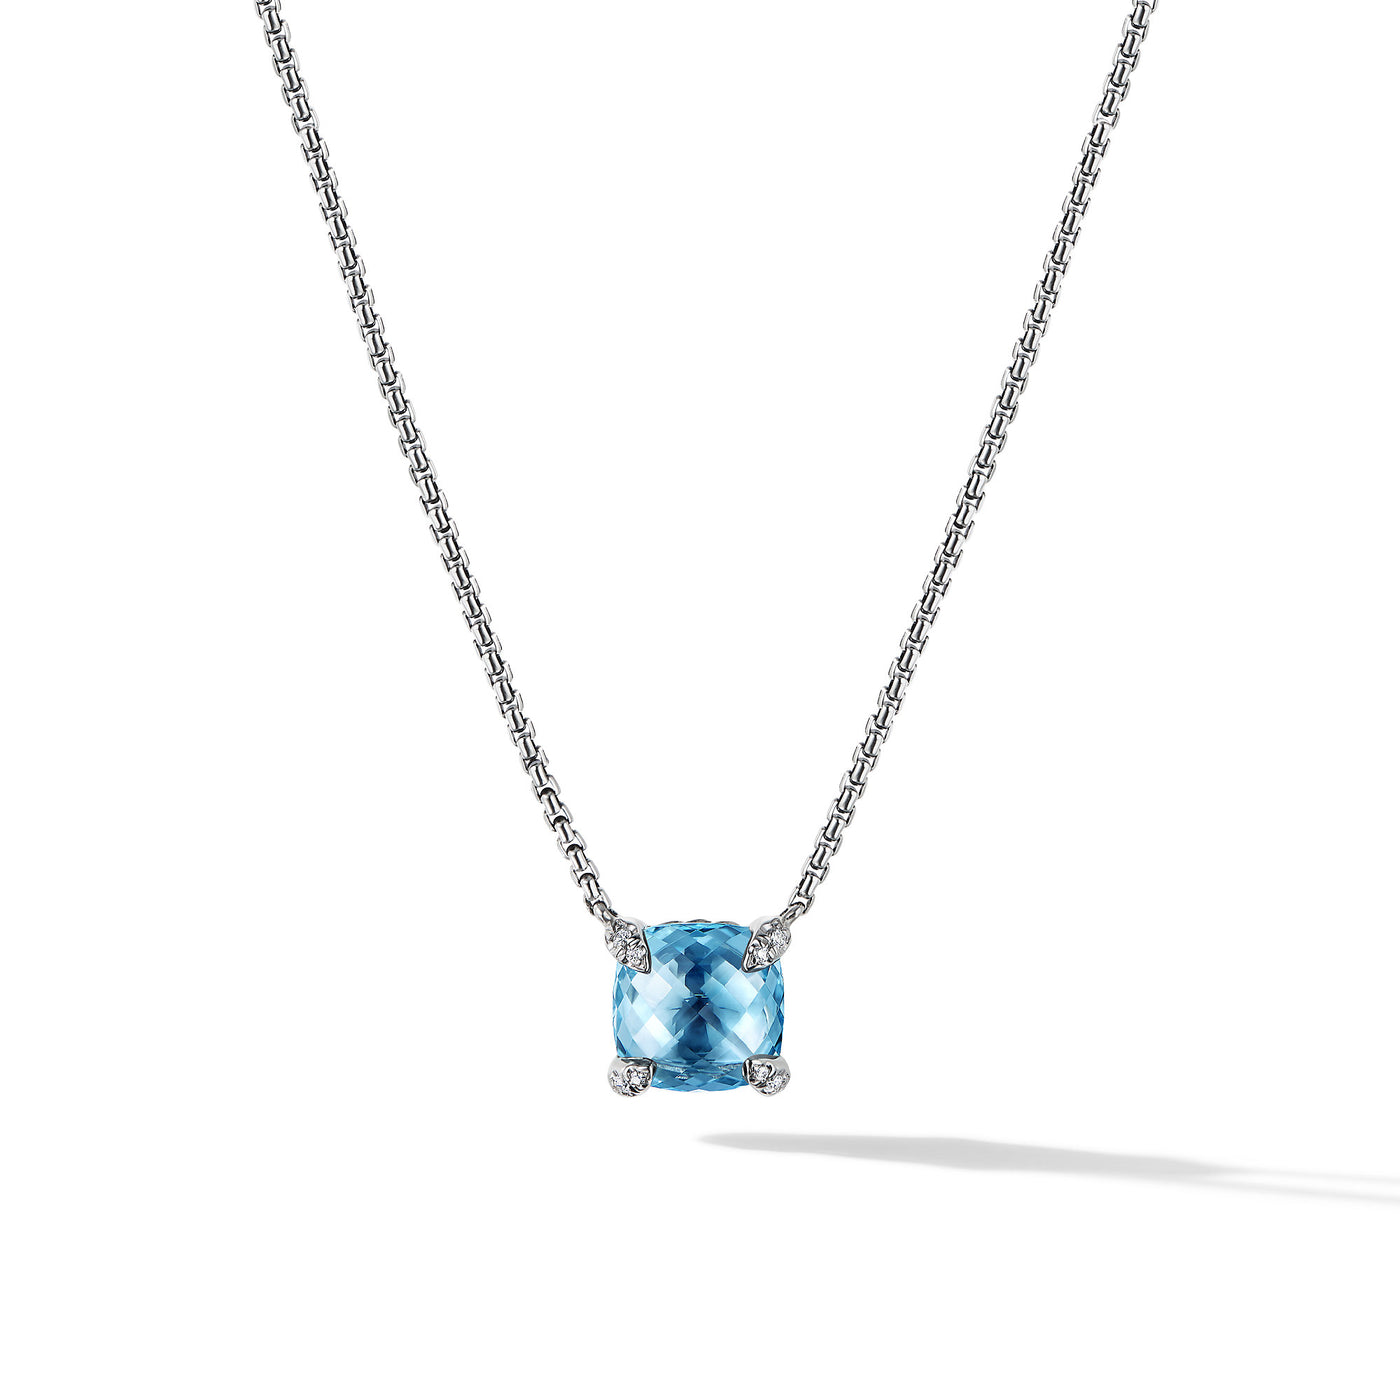 Petite Chatelaine® Pendant Necklace in Sterling Silver with Blue Topaz and Diamonds\, 9mm